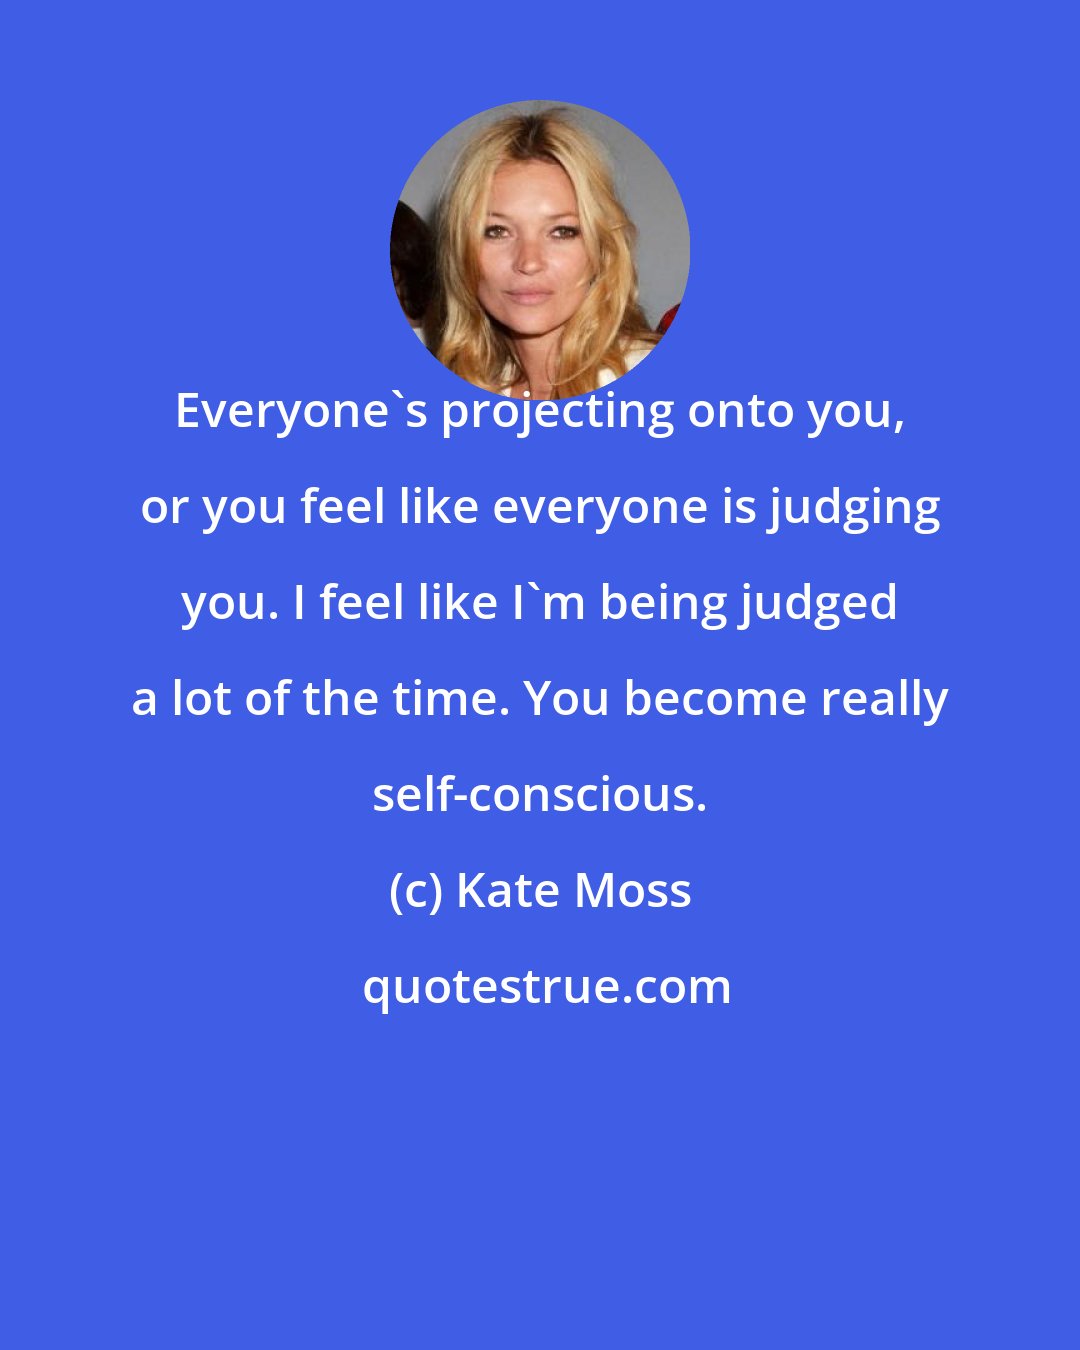 Kate Moss: Everyone's projecting onto you, or you feel like everyone is judging you. I feel like I'm being judged a lot of the time. You become really self-conscious.